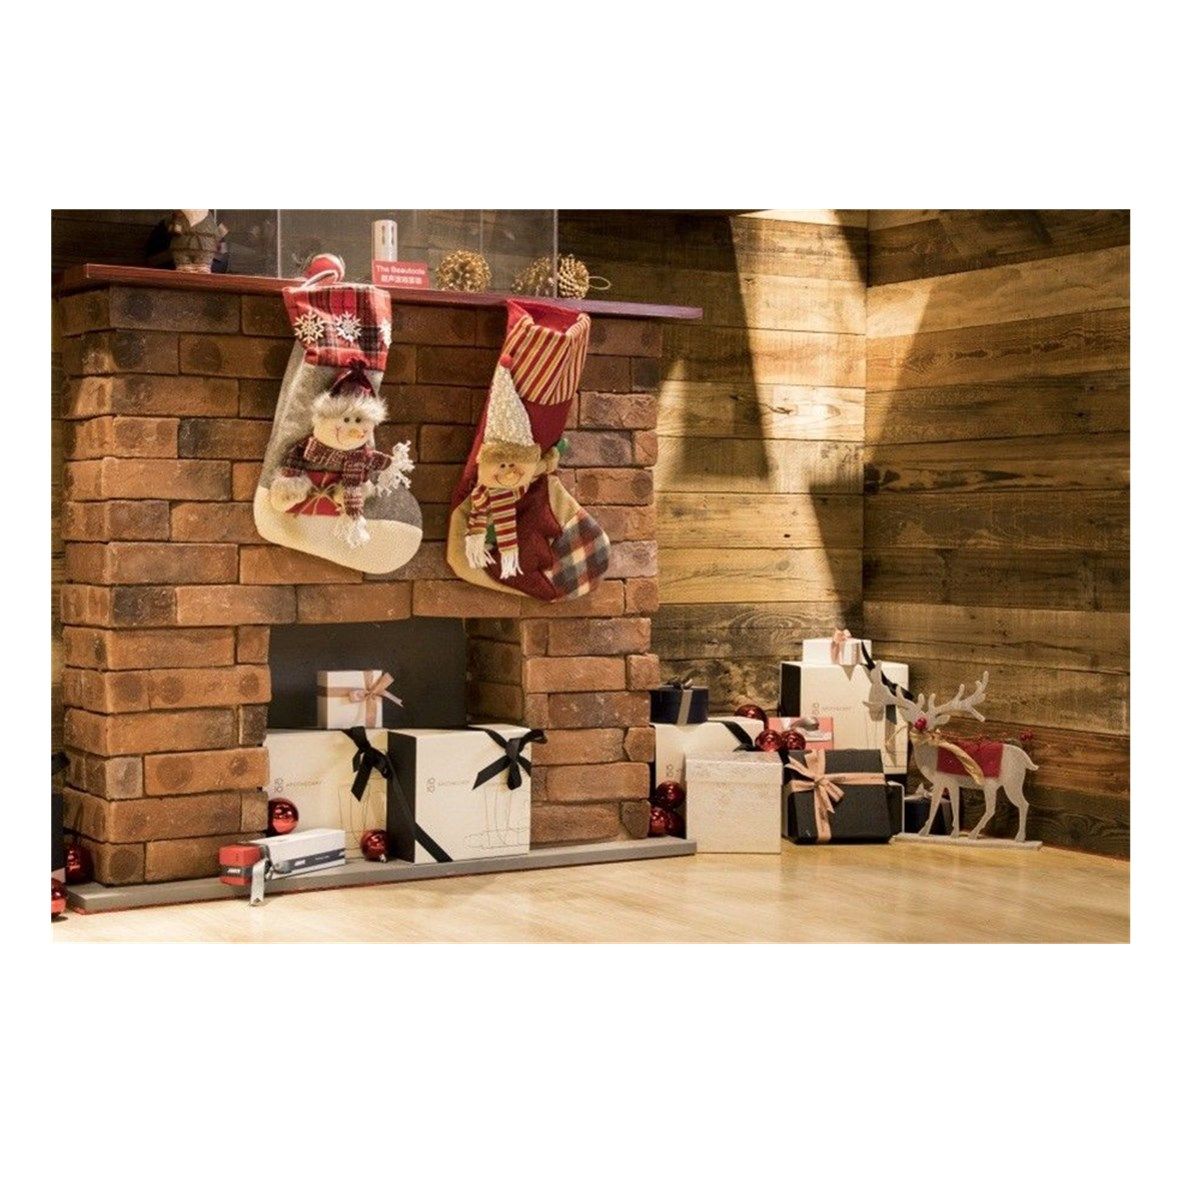 7x5FT-Christmas-Fireplace-Gift-Stockings-Photography-Backdrop-Studio-Prop-Background-1392179